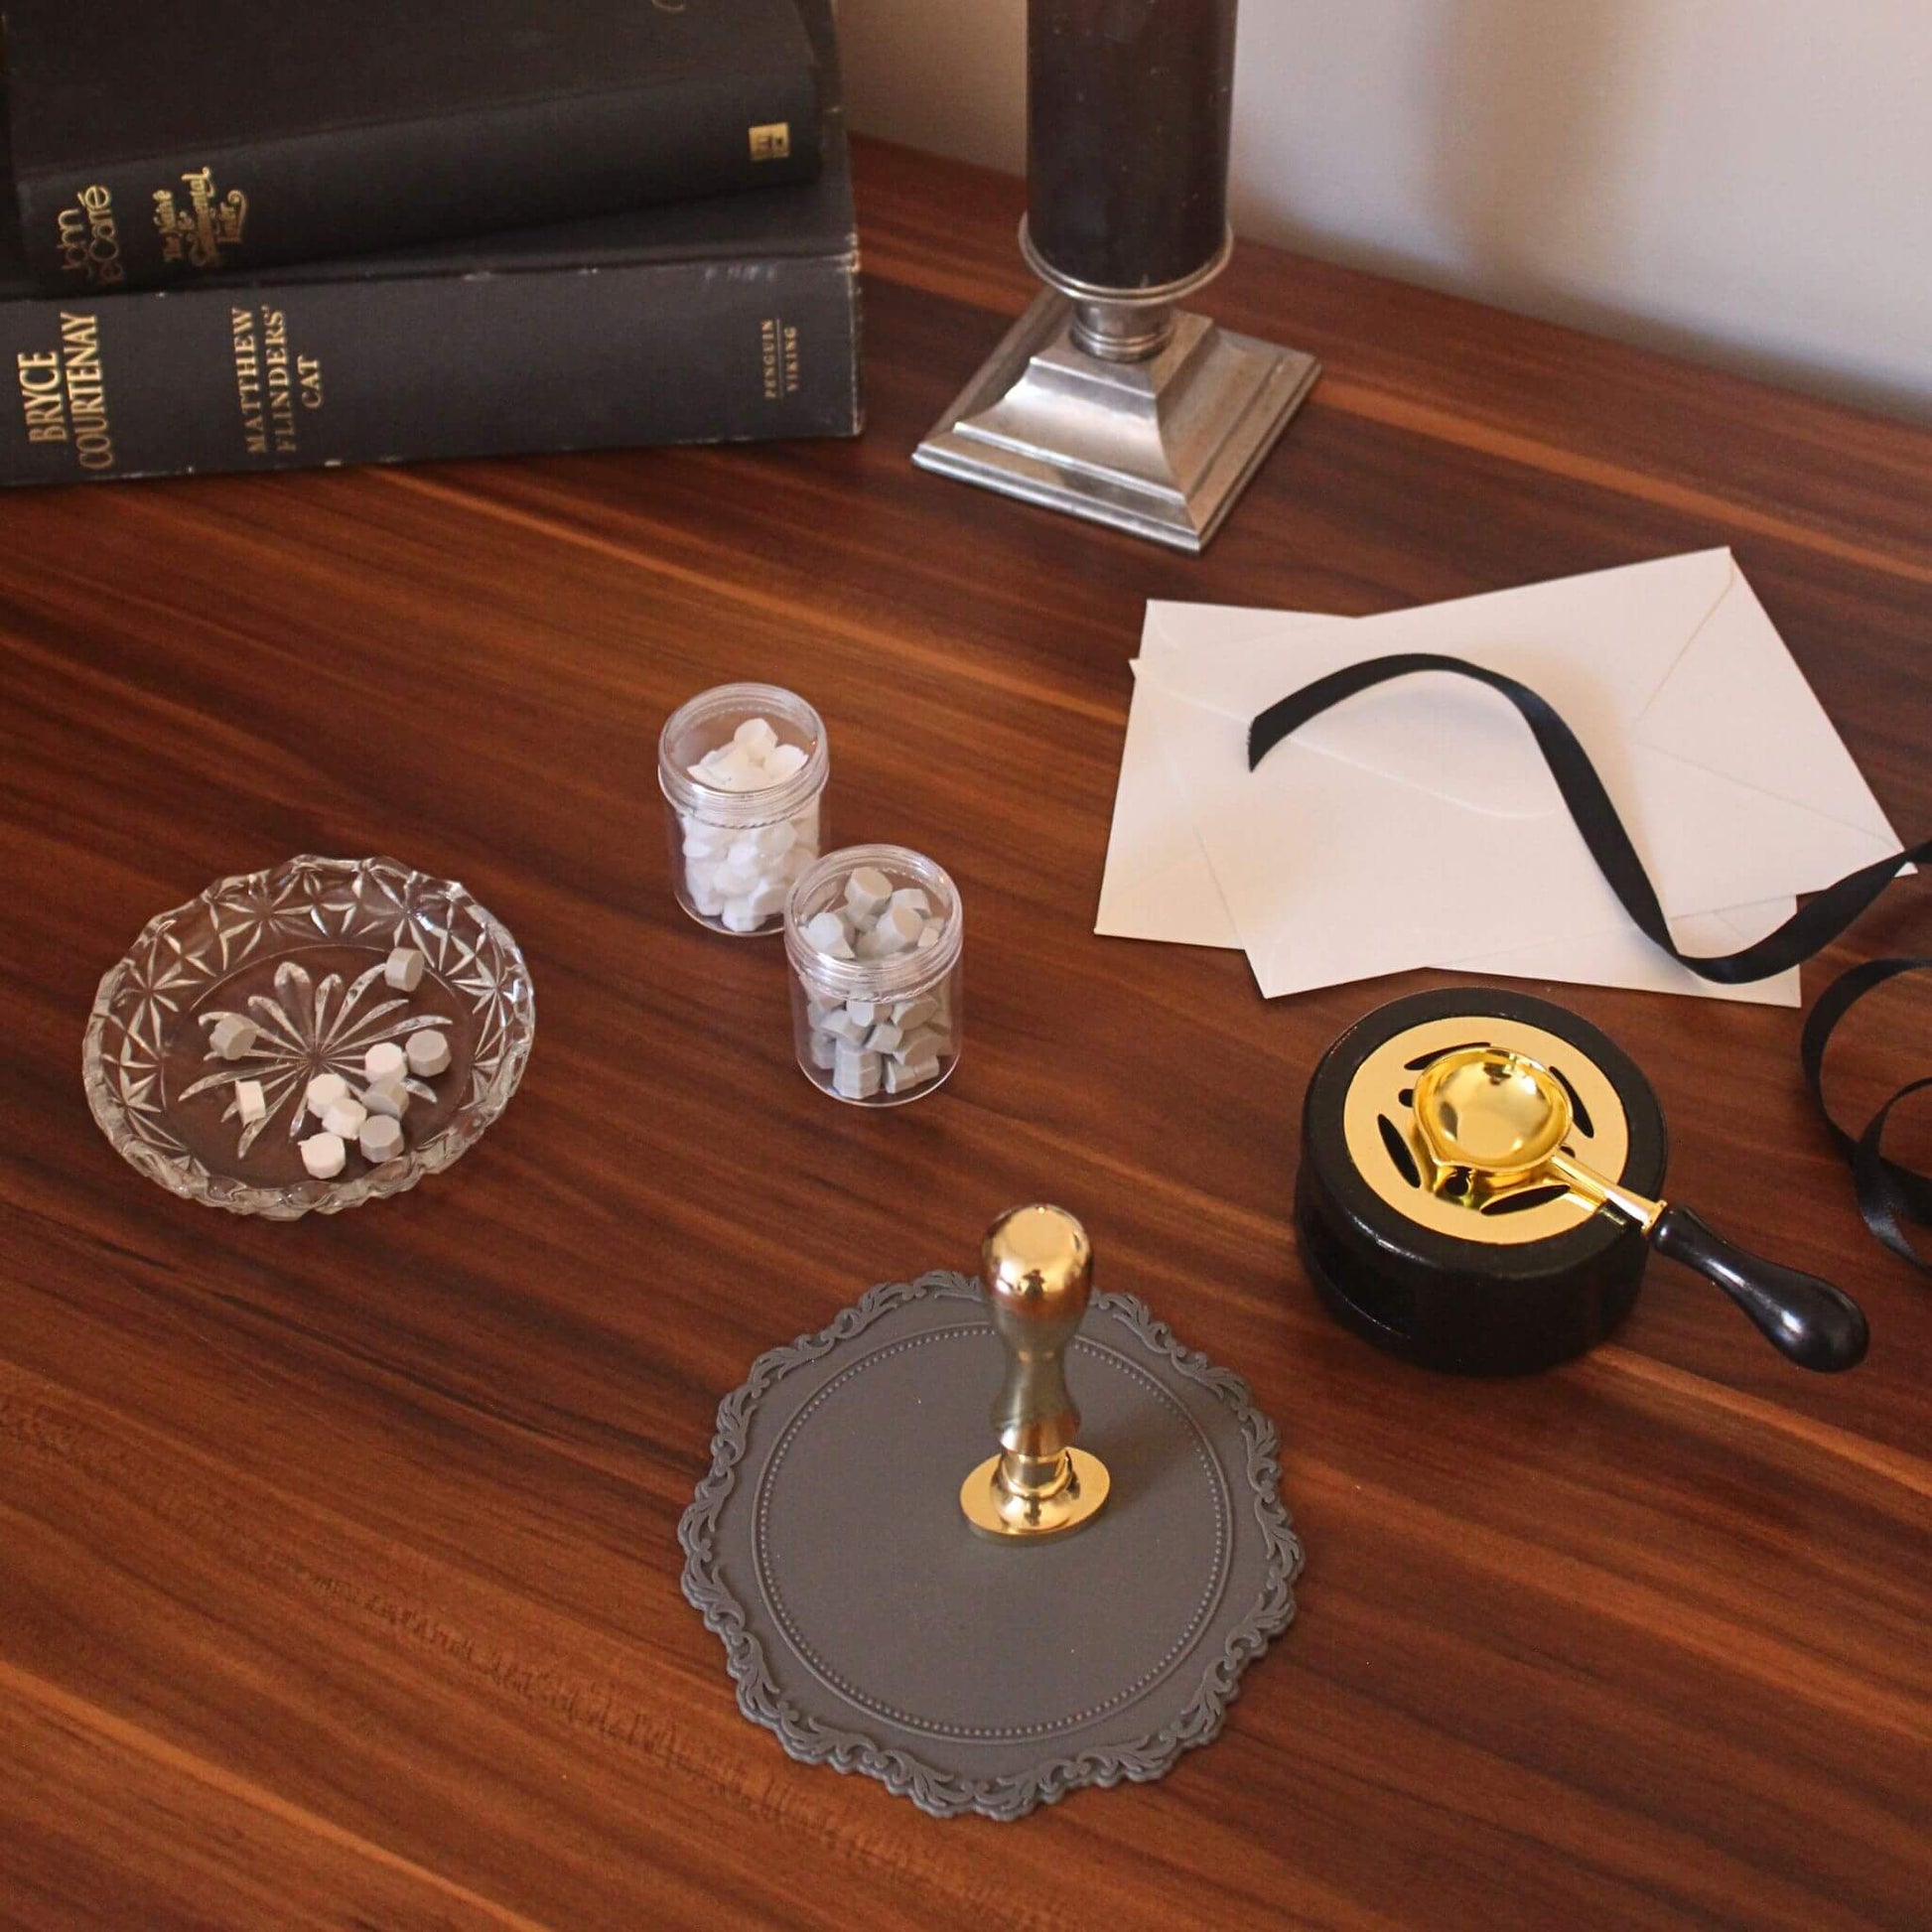 Wax seal with goddess design on desk with wax sealing mat, sealing wax beads and black wax melting stove and spoon set